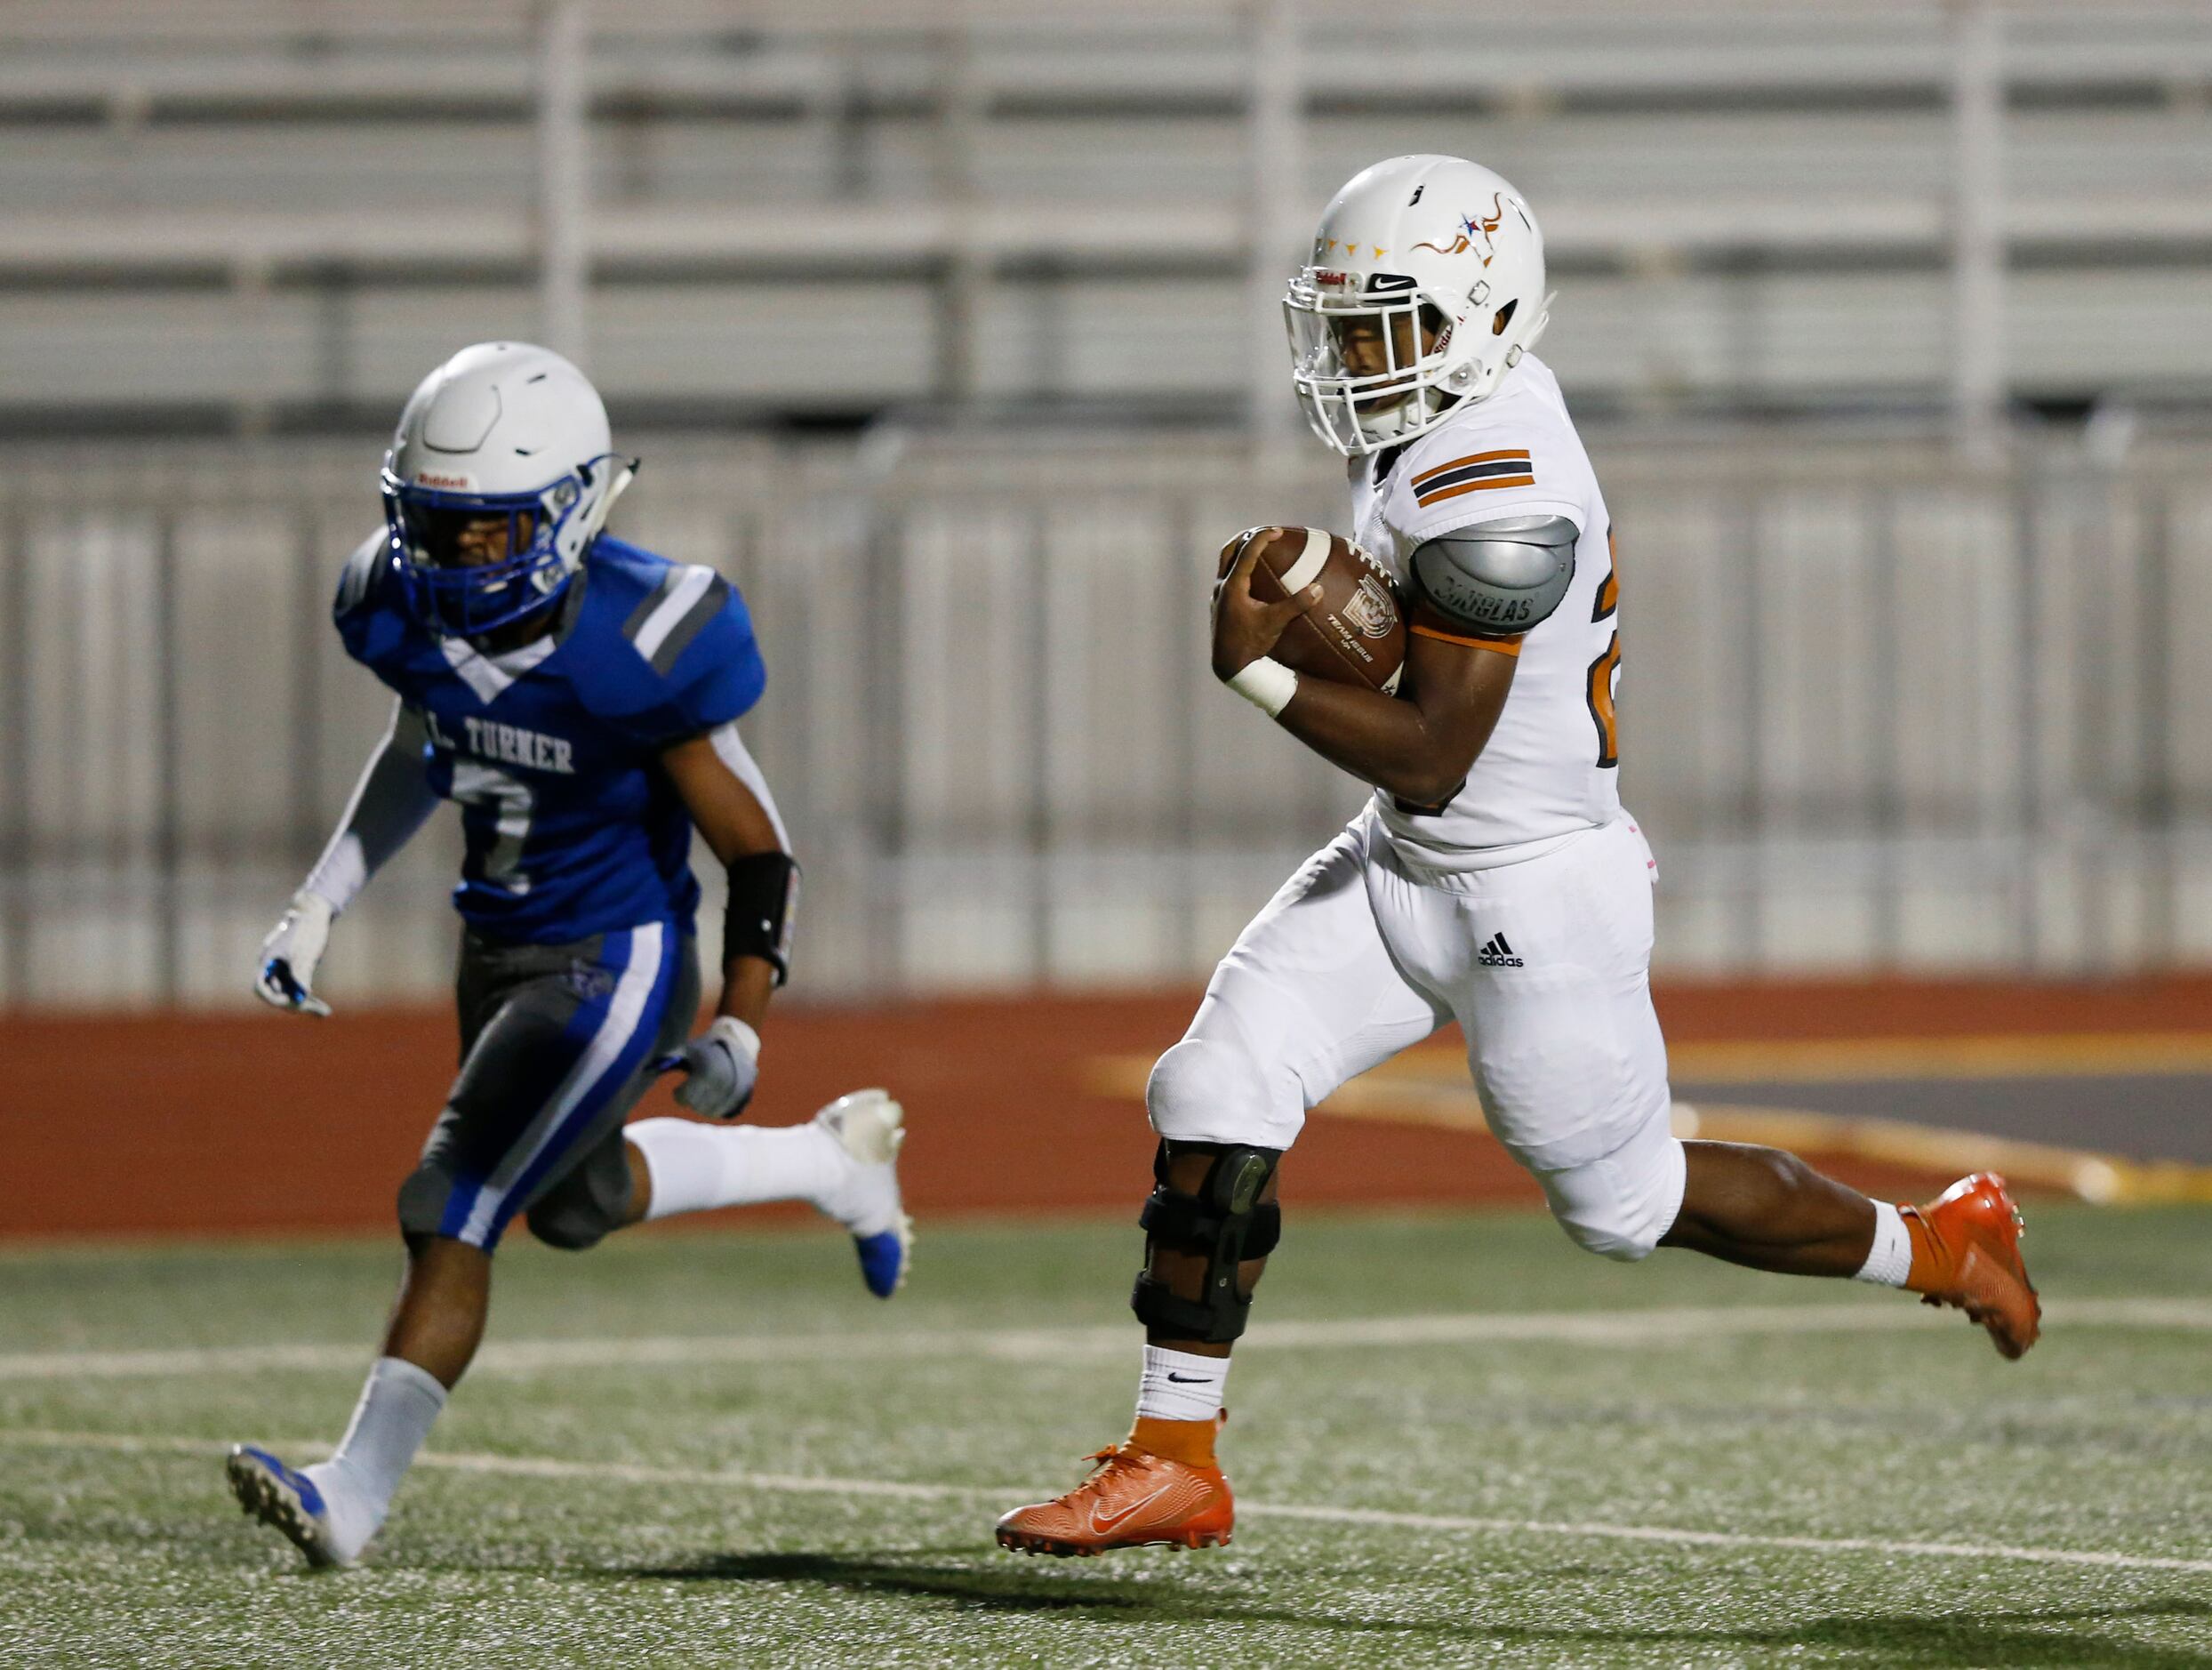 W.T. White's Elijah Edwards (20) runs for a touchdown in front of Carrollton R.L. Turner's...